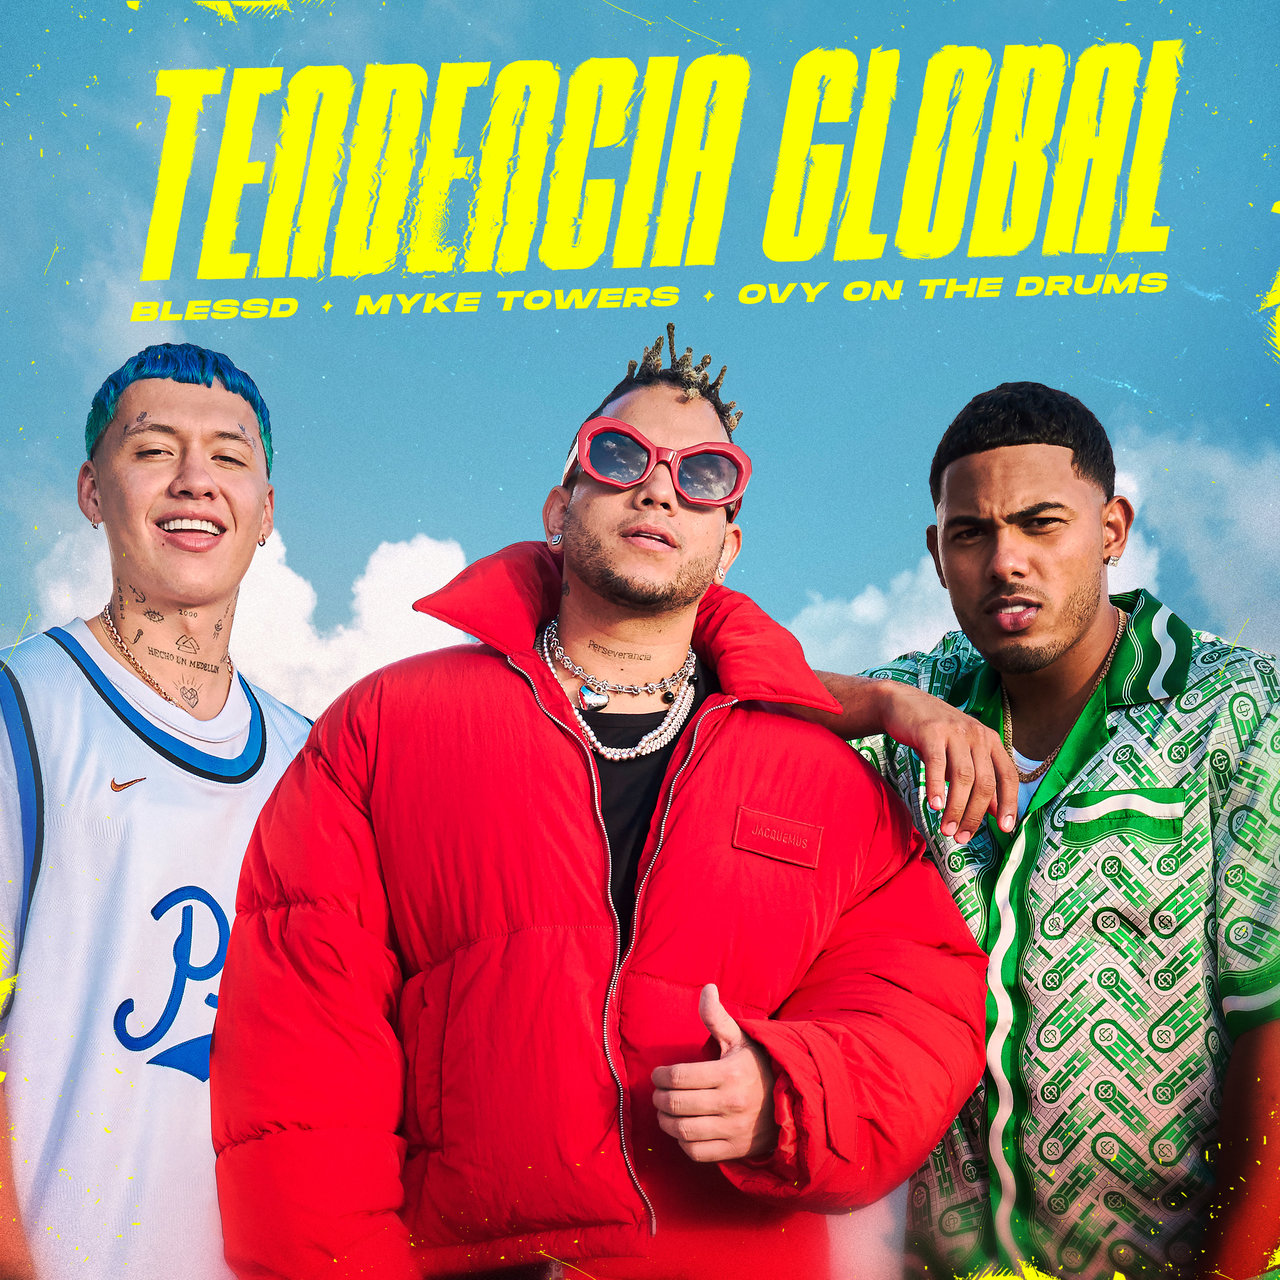 Blessd, Myke Towers, & Ovy on the Drums Tendencia Global cover artwork